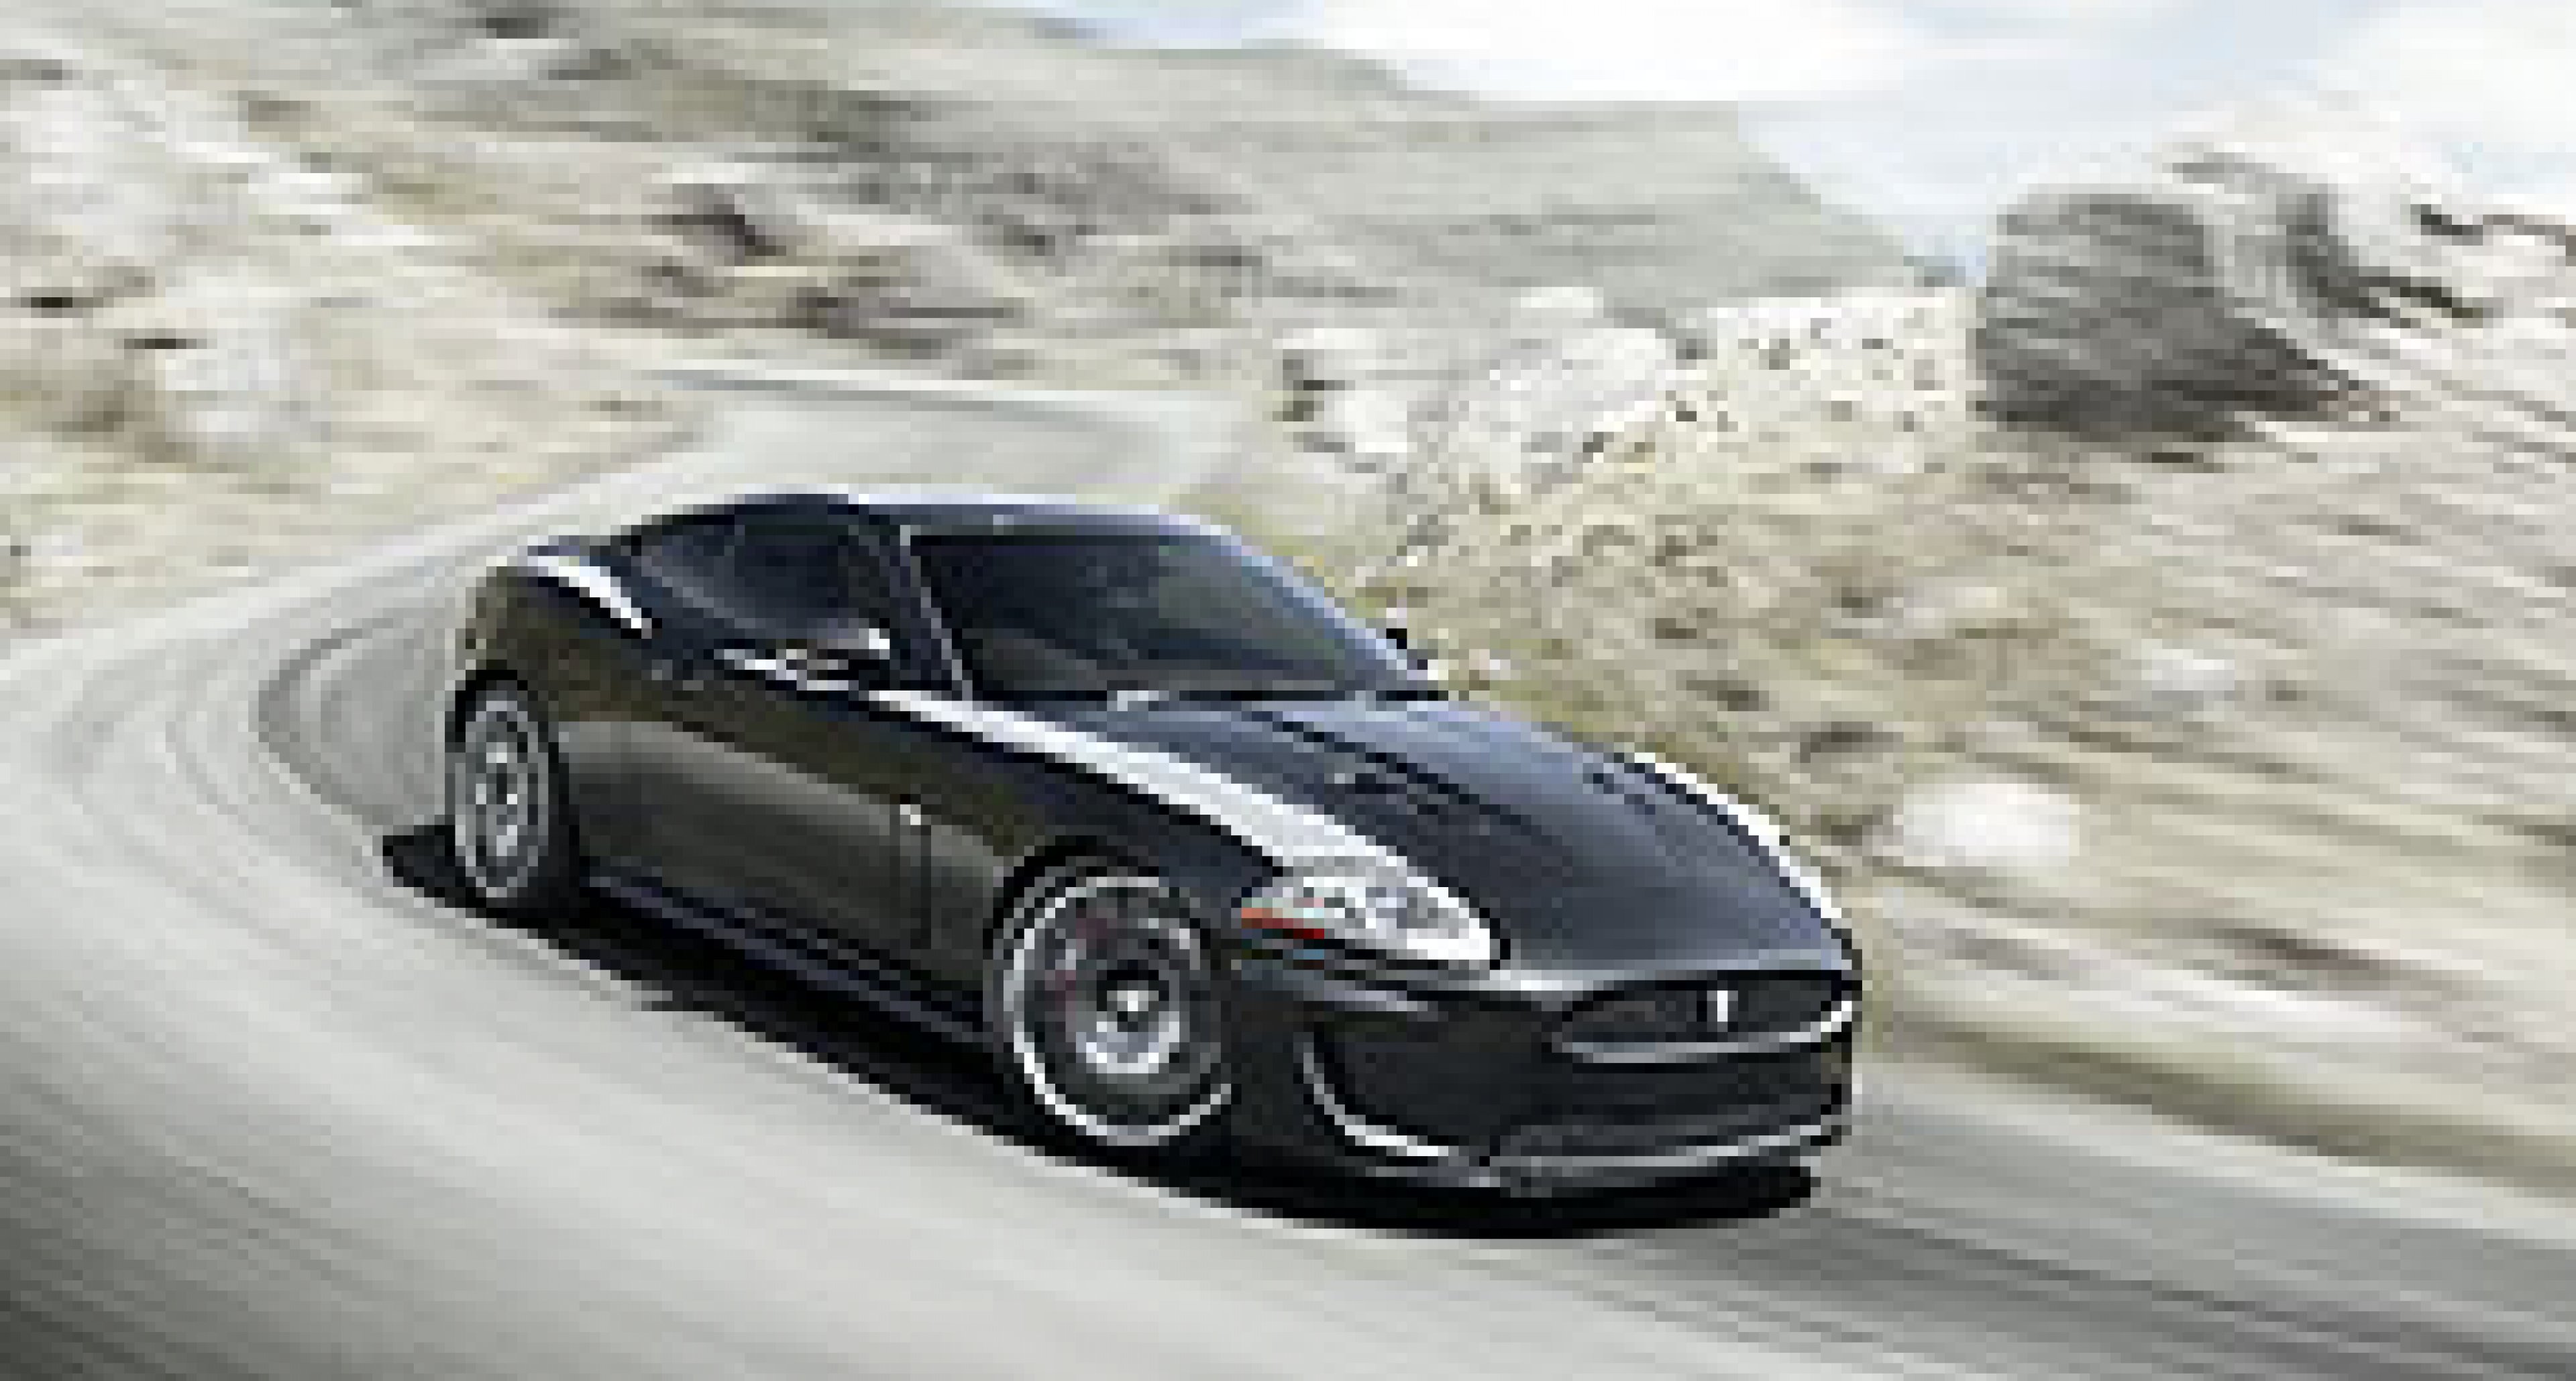 Jaguar XKR 75 to Debut at Festival of Speed